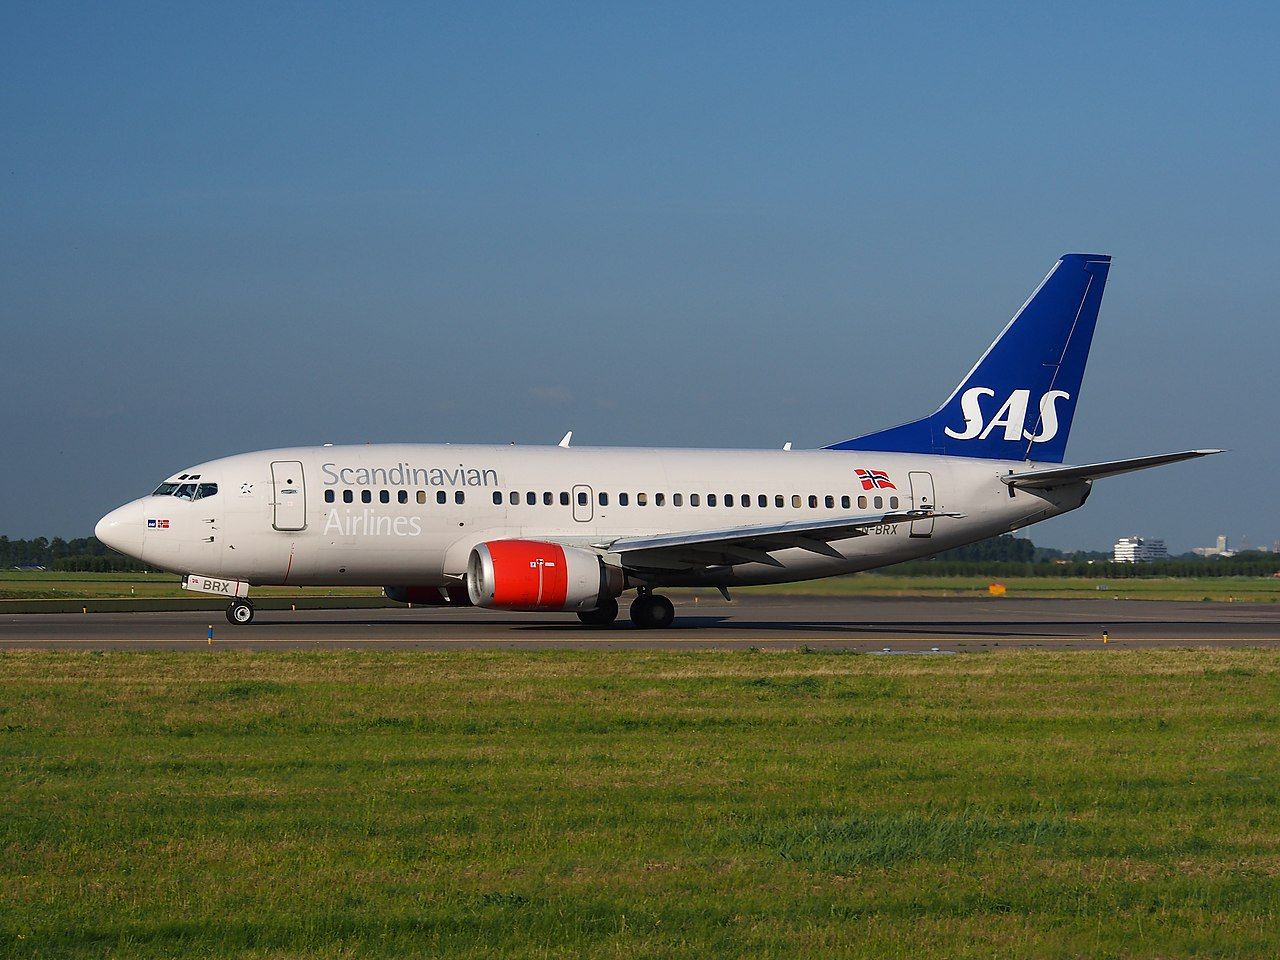 LN-BRX_SAS_Scandinavian_Airlines_Boeing_737-505_-_cn_25797_taxiing_15july2013_pic-004